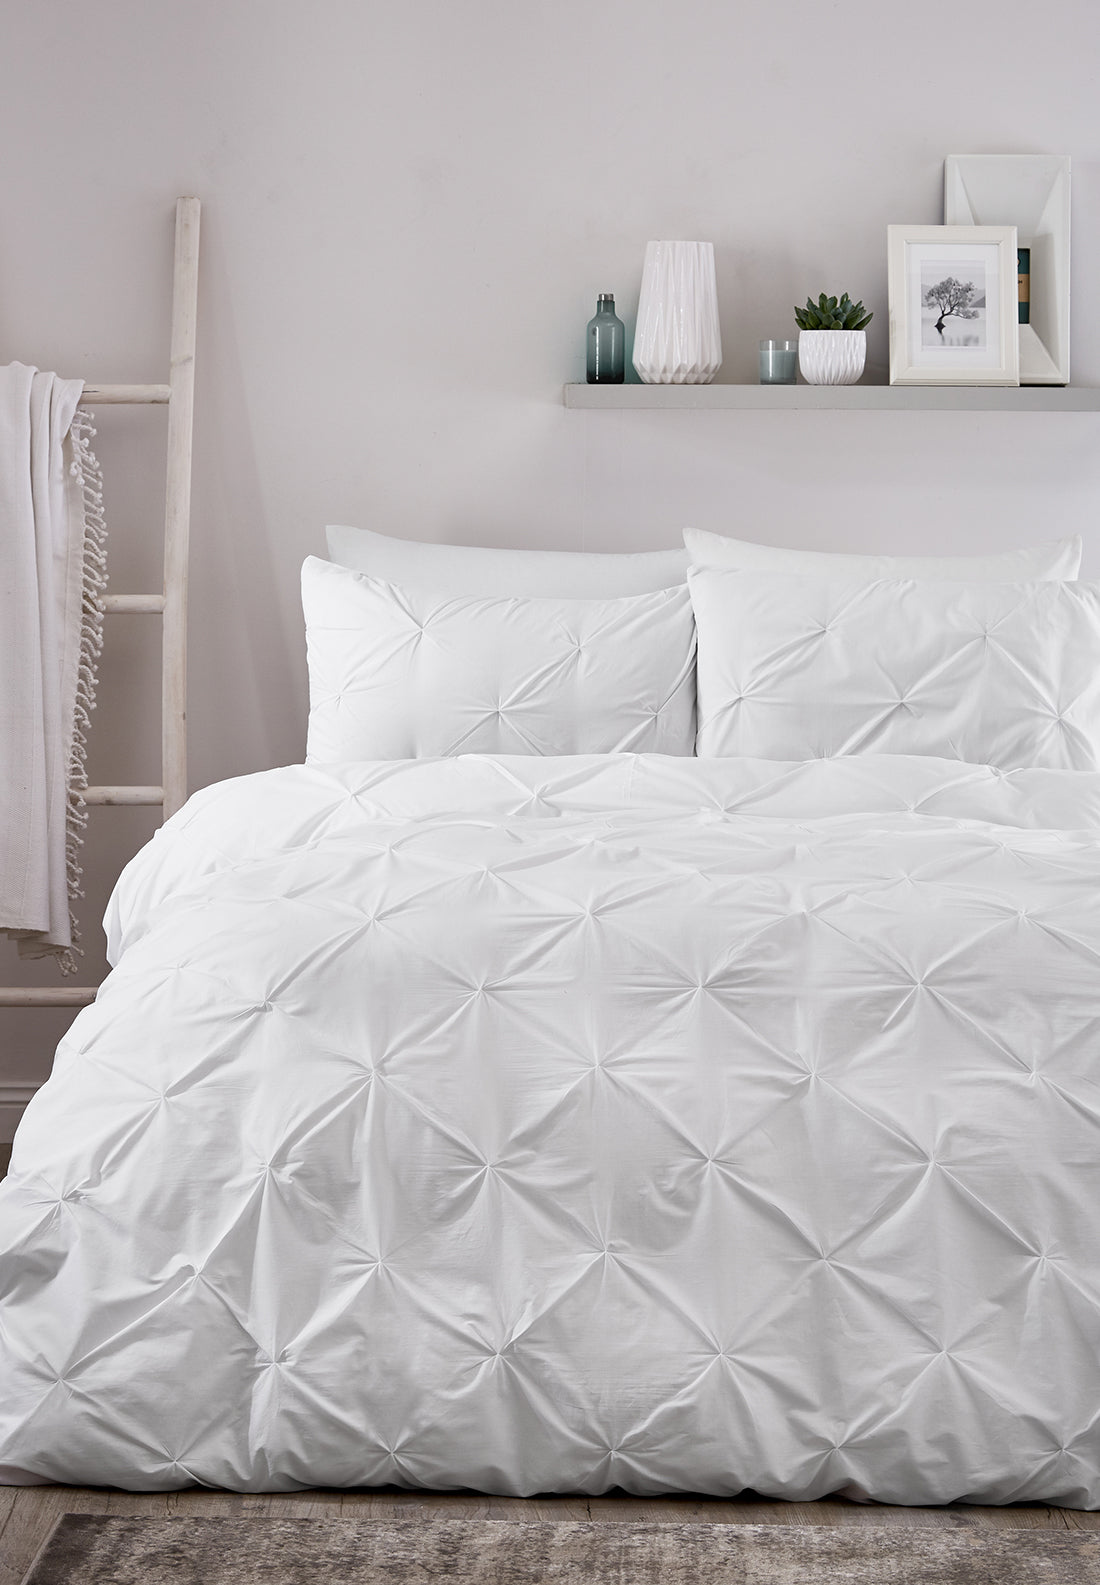 The Home Luxury Collection Lorna Duvet Cover Set - White 1 Shaws Department Stores